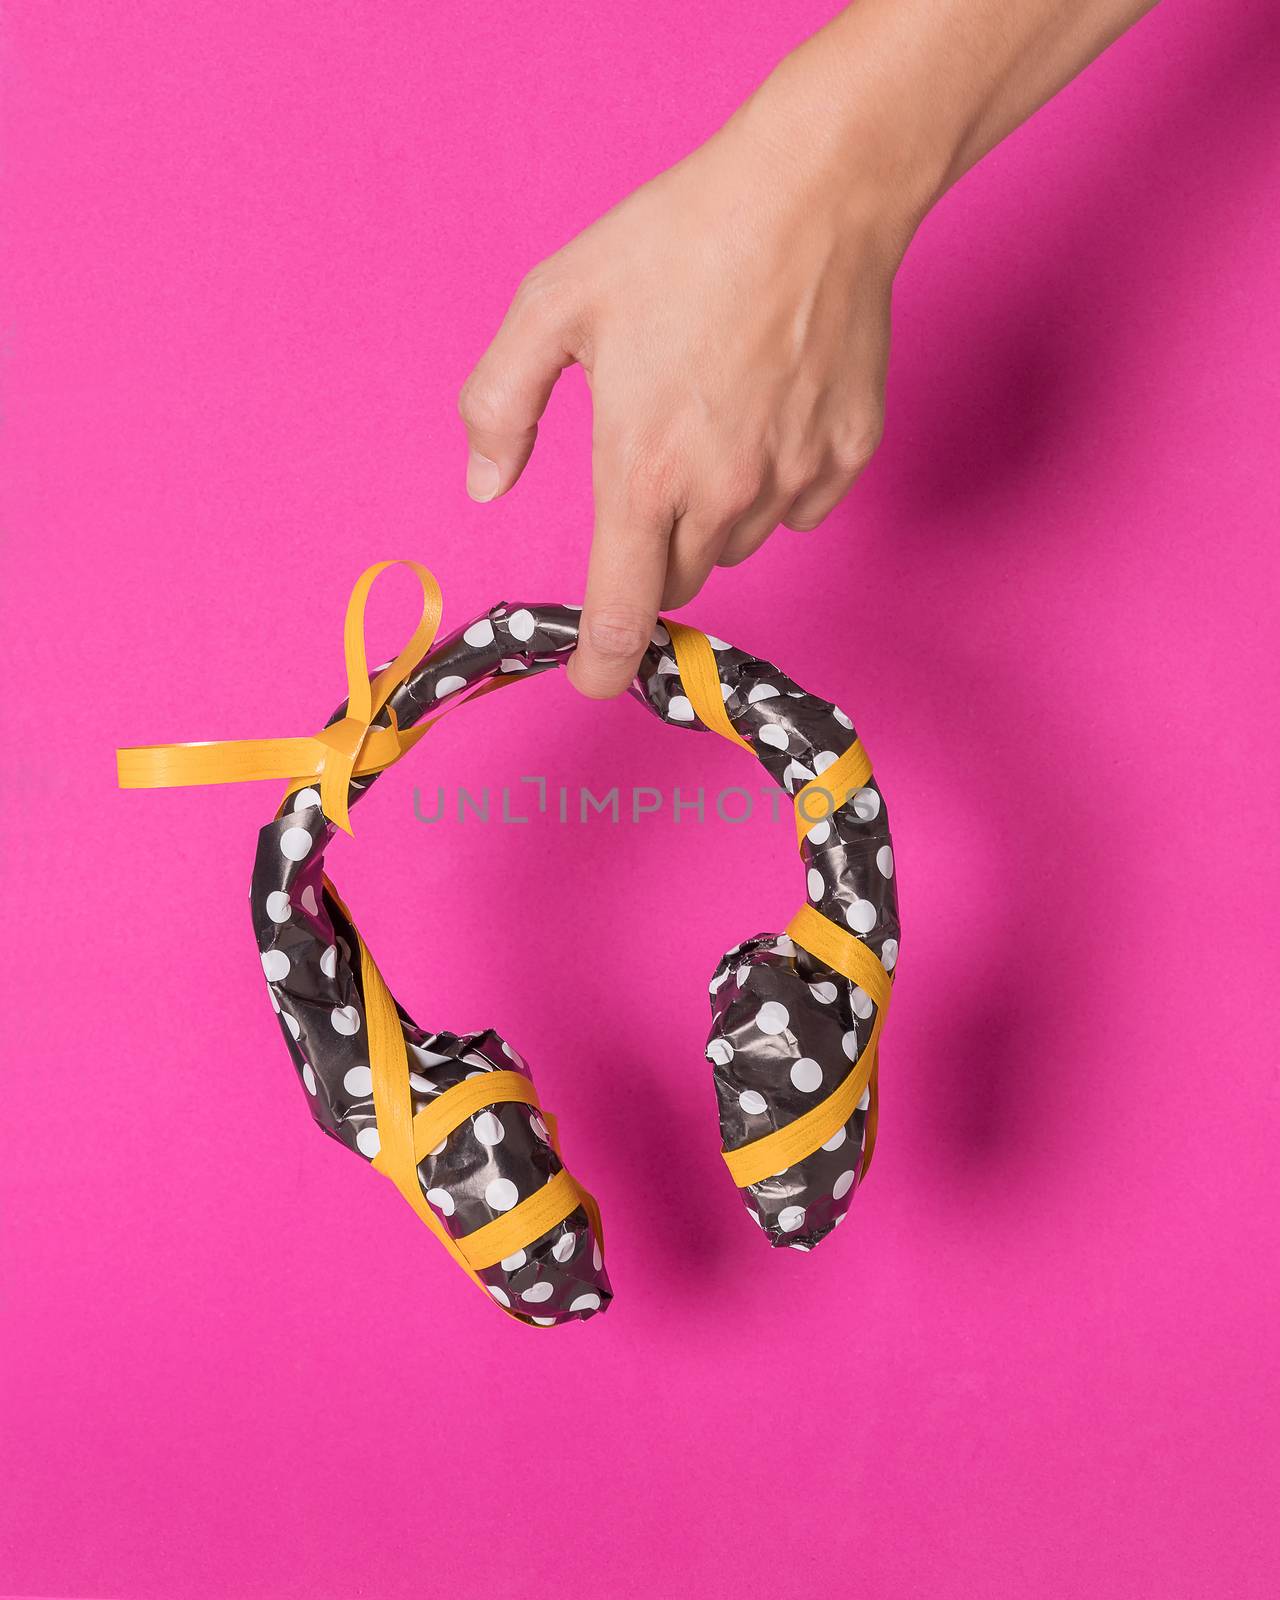 Female hand holding a headphones wrapped in black gift paper with white dots and yellow ribbon on a magenta background